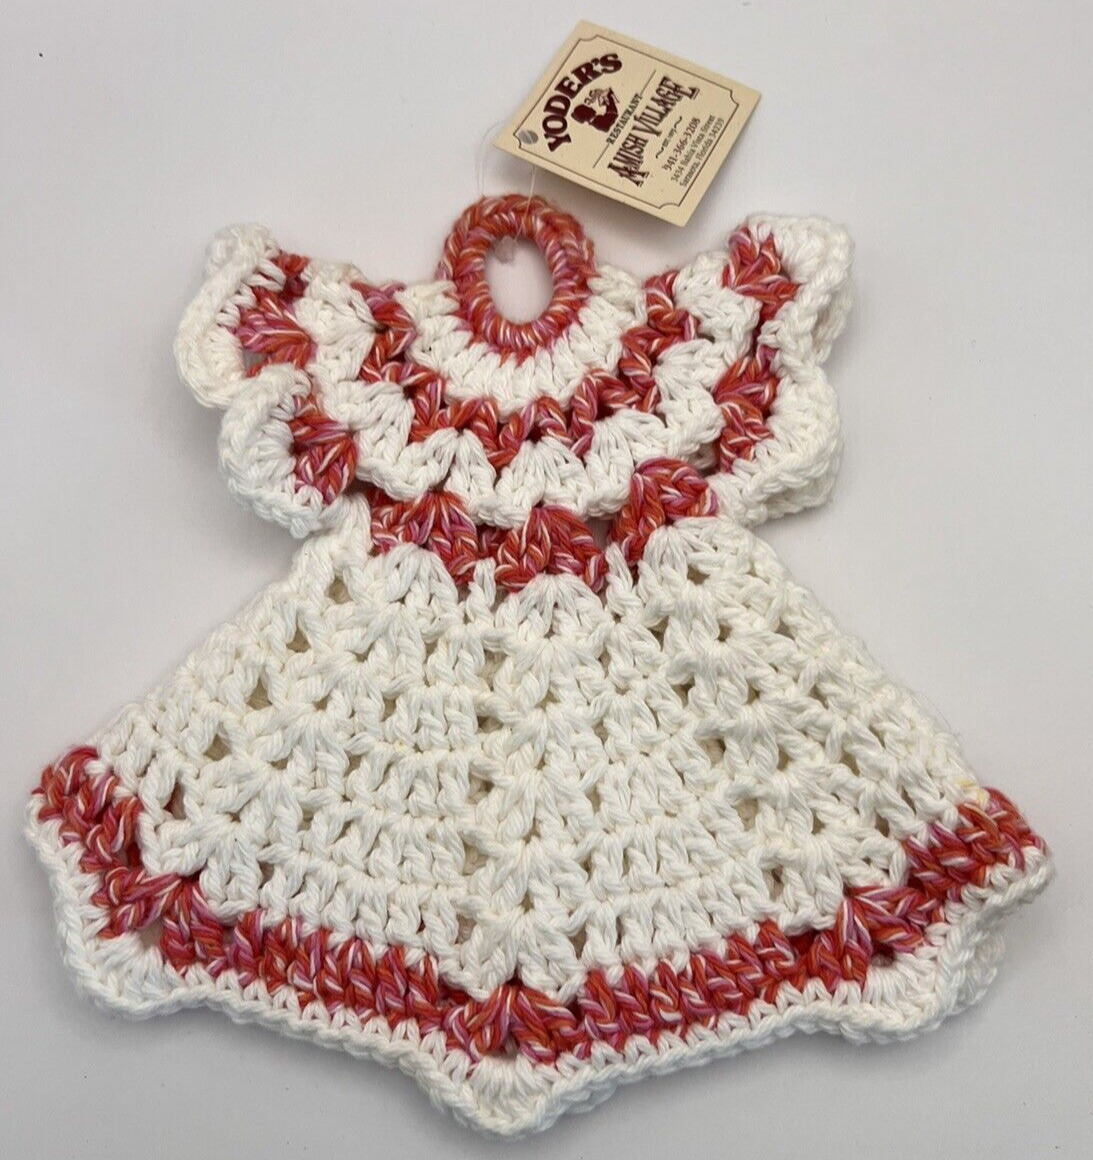 New Hand Crafted Crocheted Cotton Little Dress White Red Pot Holder NWT Retro